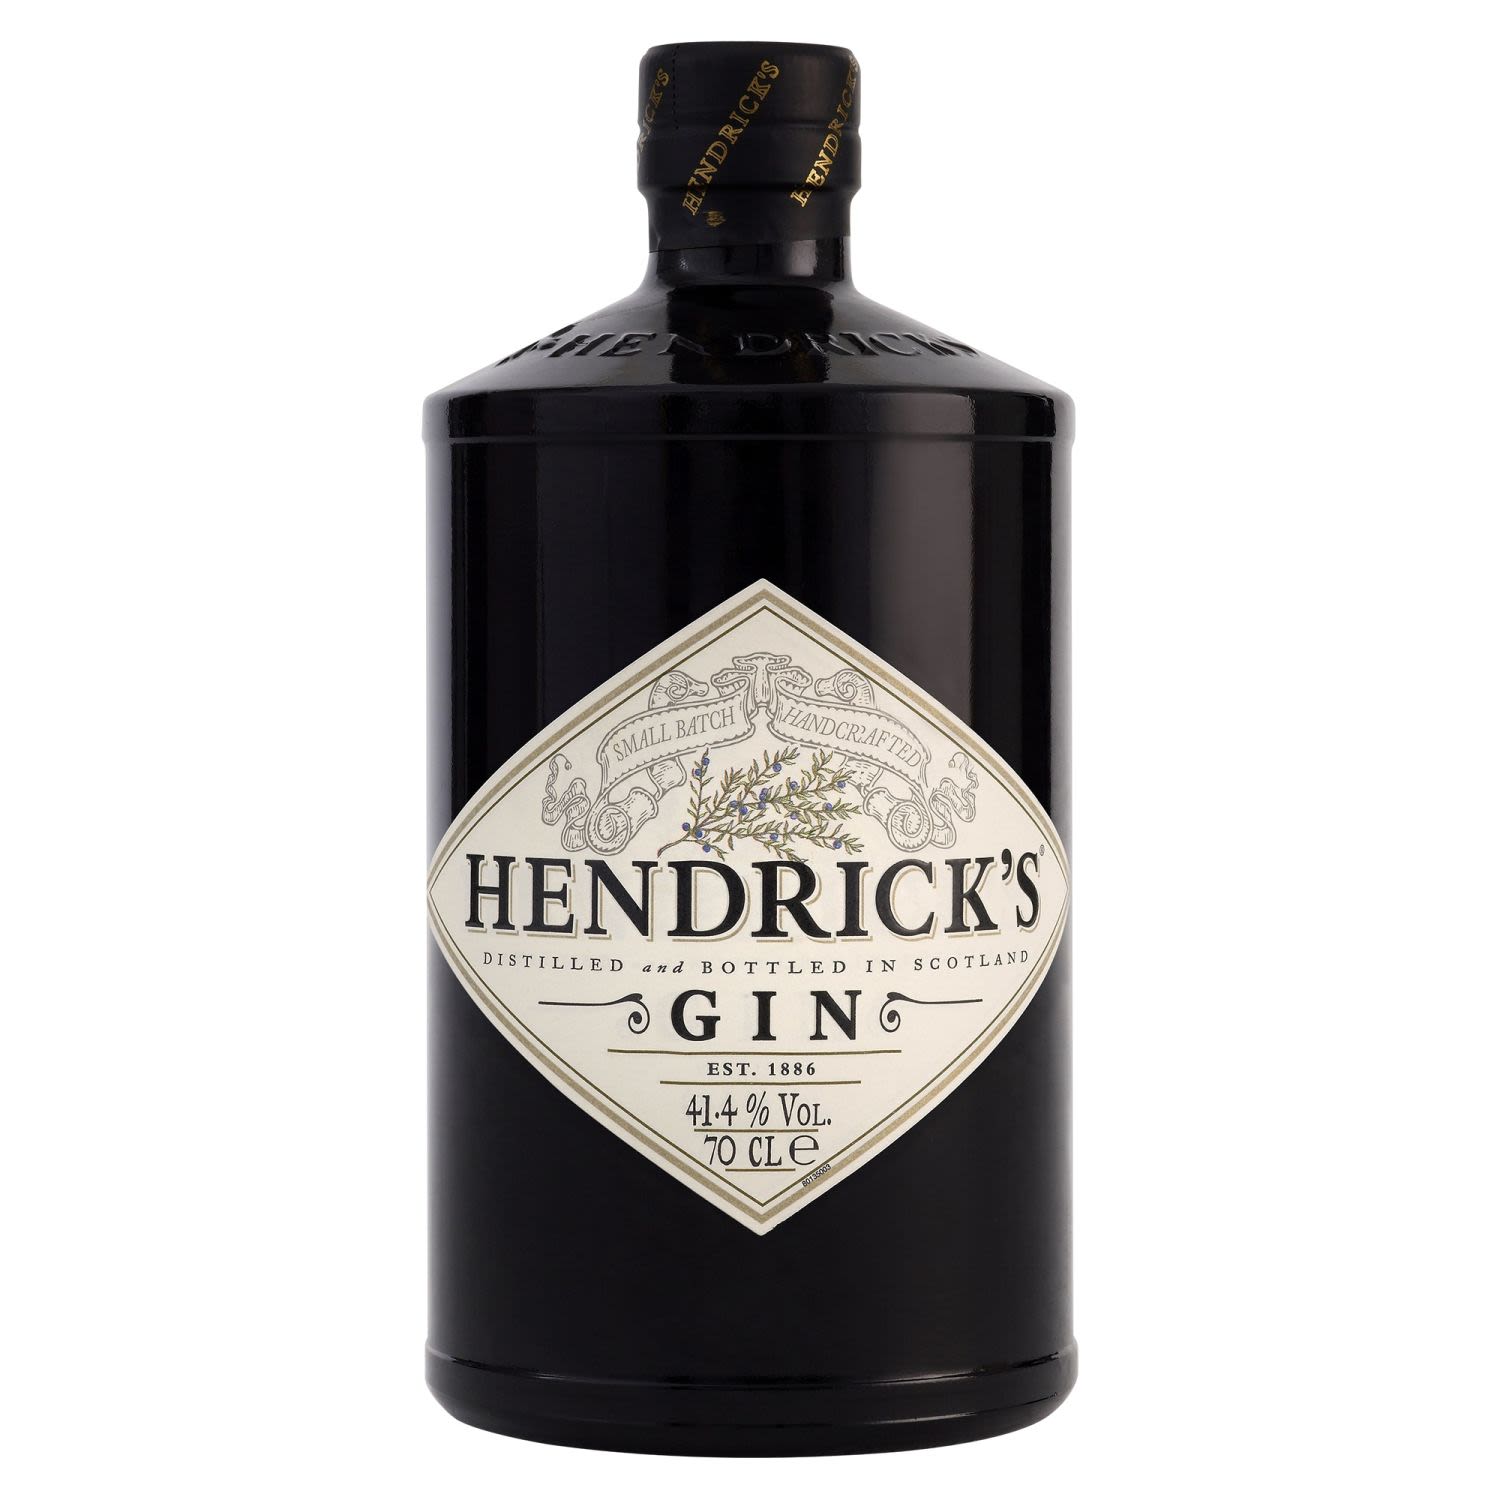 The iconic medicine bottle shape of the Hendrick's Gin lets you know that you're in for a quality Gin experience. It is an unexpected infusion of cucumber & rose petals that results in a most iconic Gin. Mix with Indian tonic water for the classic G&T or use it in your next martini.<br /> <br />Alcohol Volume: 41.40%<br /><br />Pack Format: Bottle<br /><br />Standard Drinks: 23</br /><br />Pack Type: Bottle<br /><br />Country of Origin: Scotland<br />